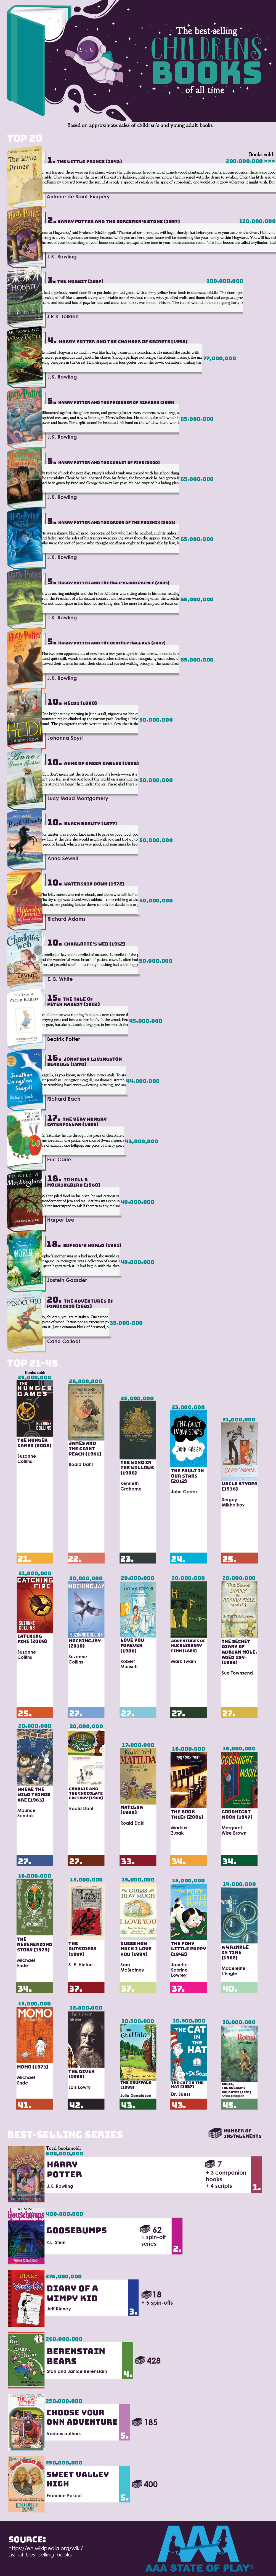 best-selling-childrens-books-all-time-3